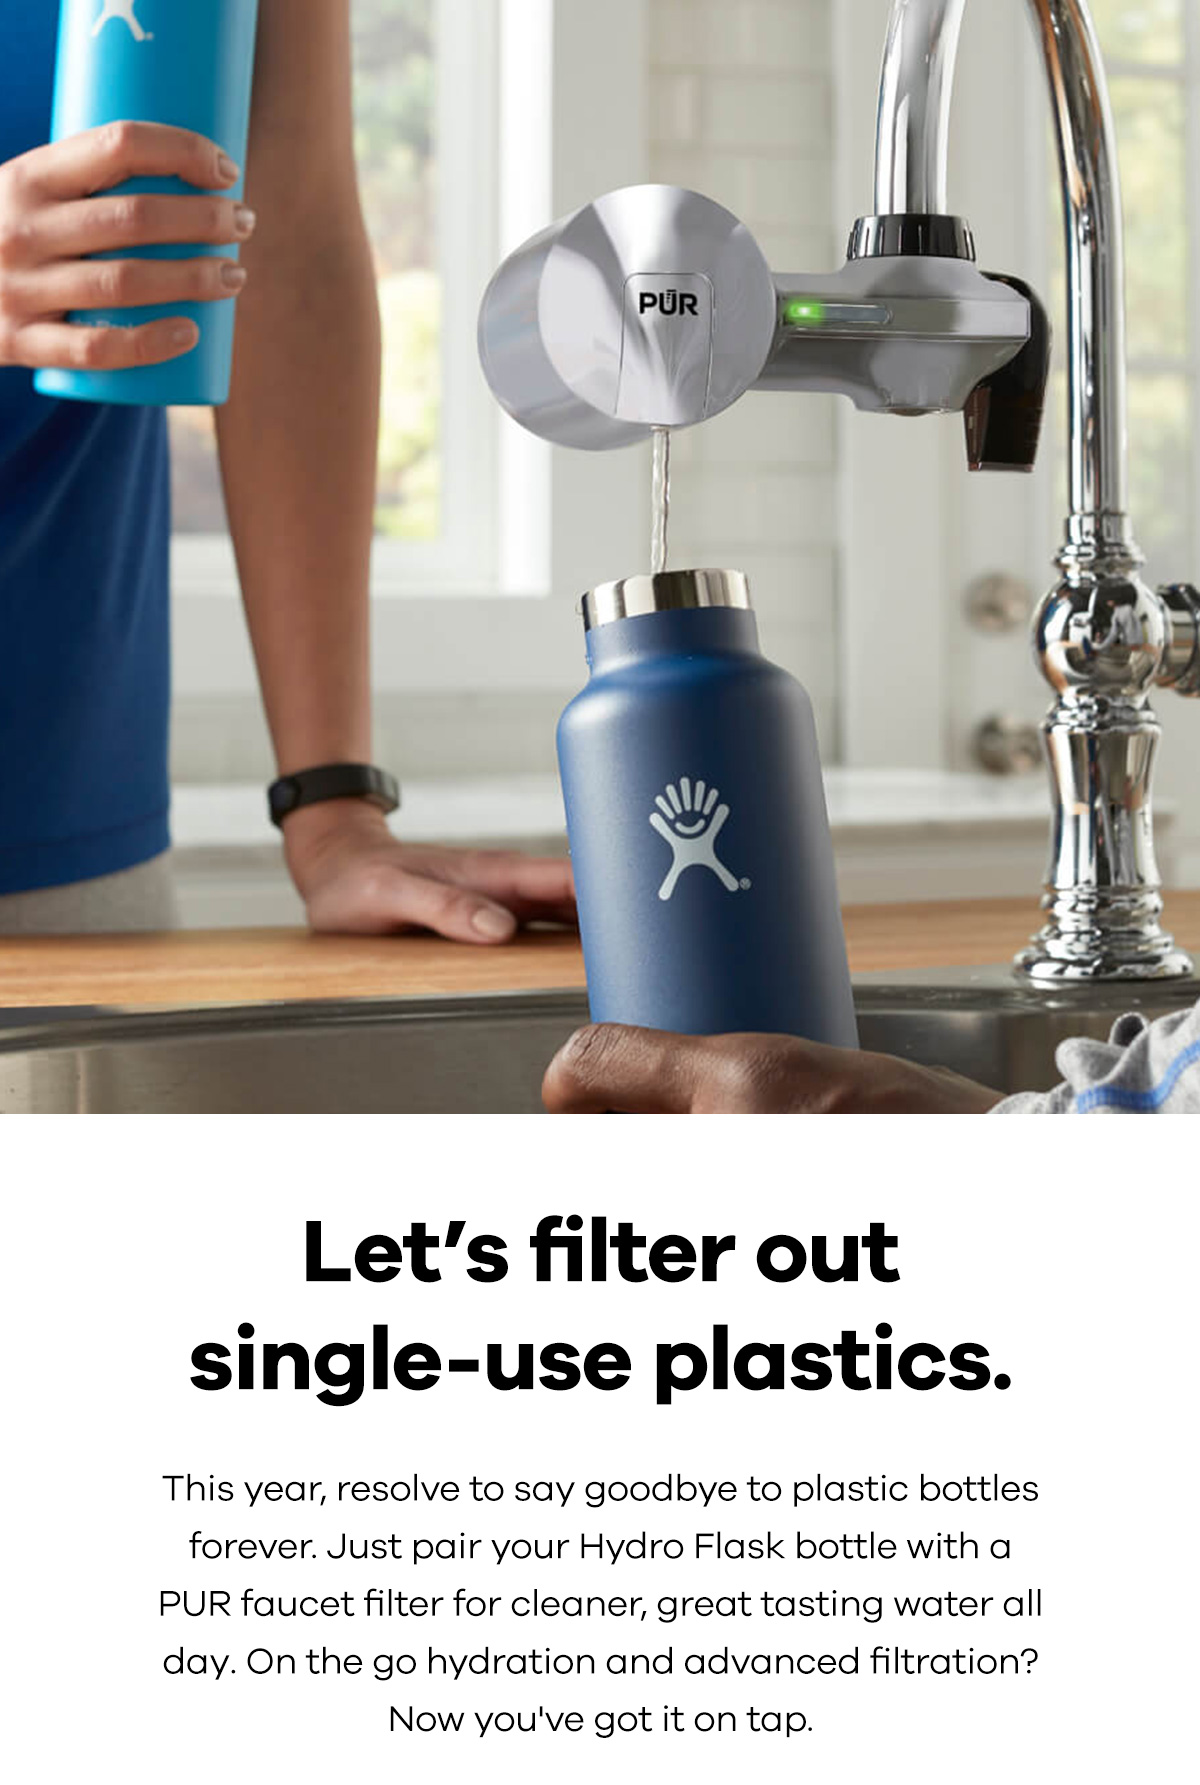 Let's filter out single-use plastics. This year, resolve to say goodbye to plastic bottles forever. Just pair your Hydro Flask bottle with a PUR faucet filter for cleaner, great tasting water all day. On the go hydration and advanced filtration? Now you've got it on tap.